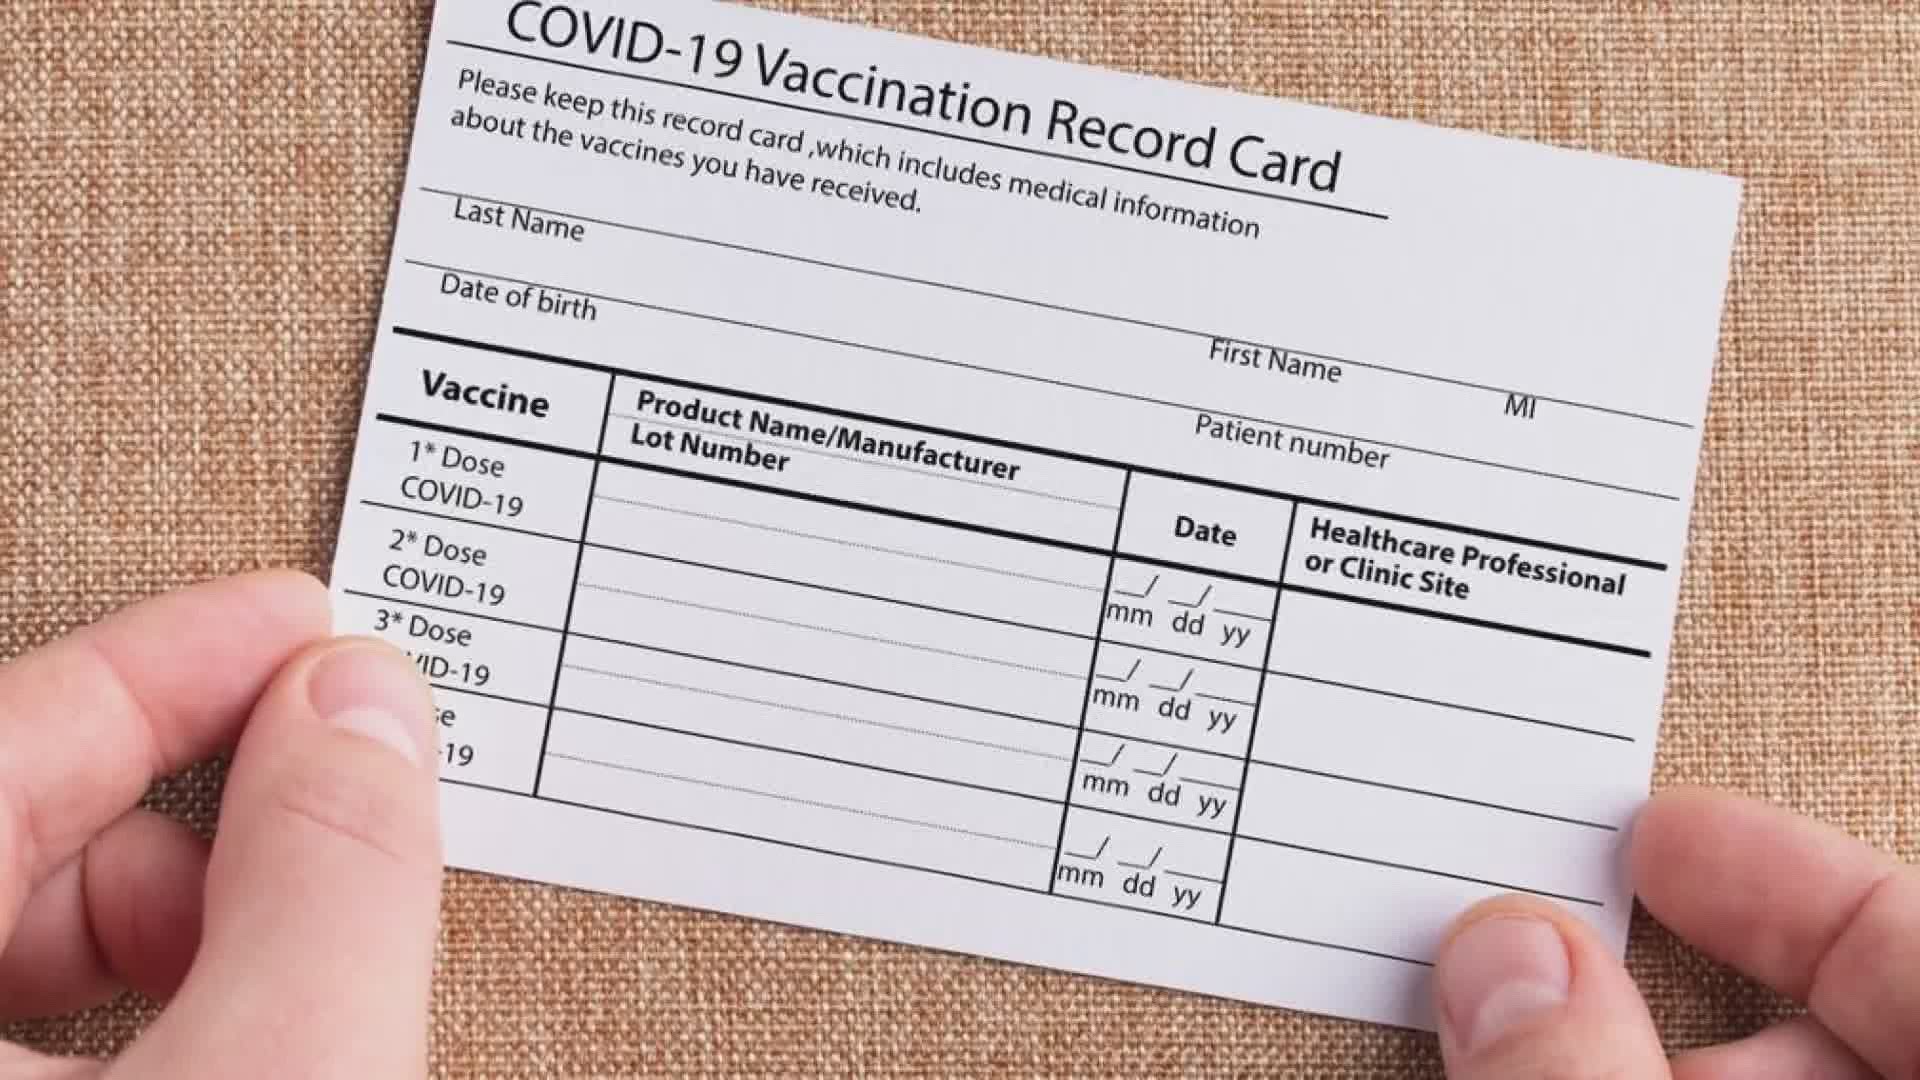 Selling fake vaccine cards could lead to fines or jail time